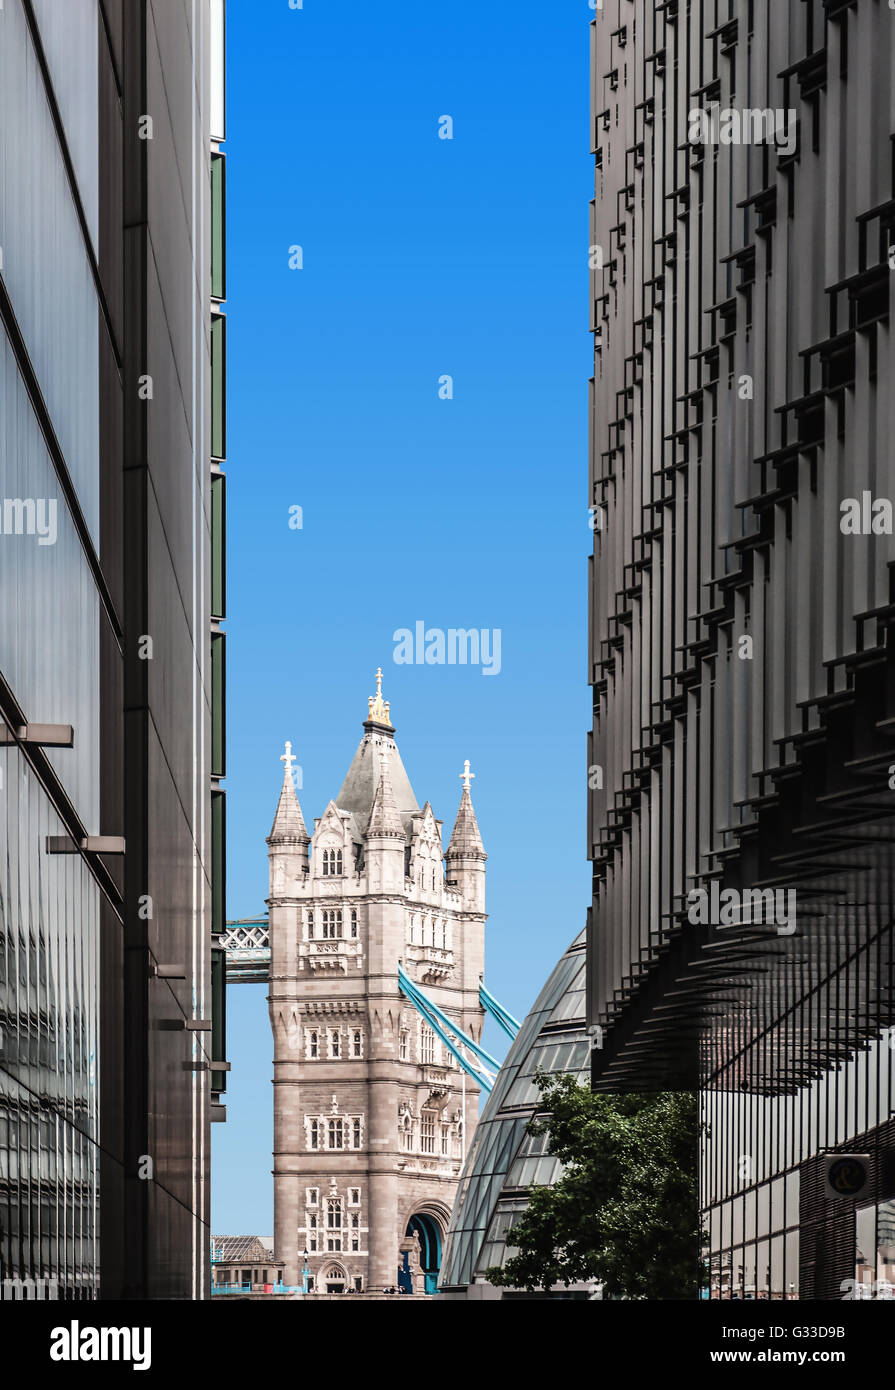 Tower Bridge viewed between modern buildings. Contrast of old and new London. Stock Photo